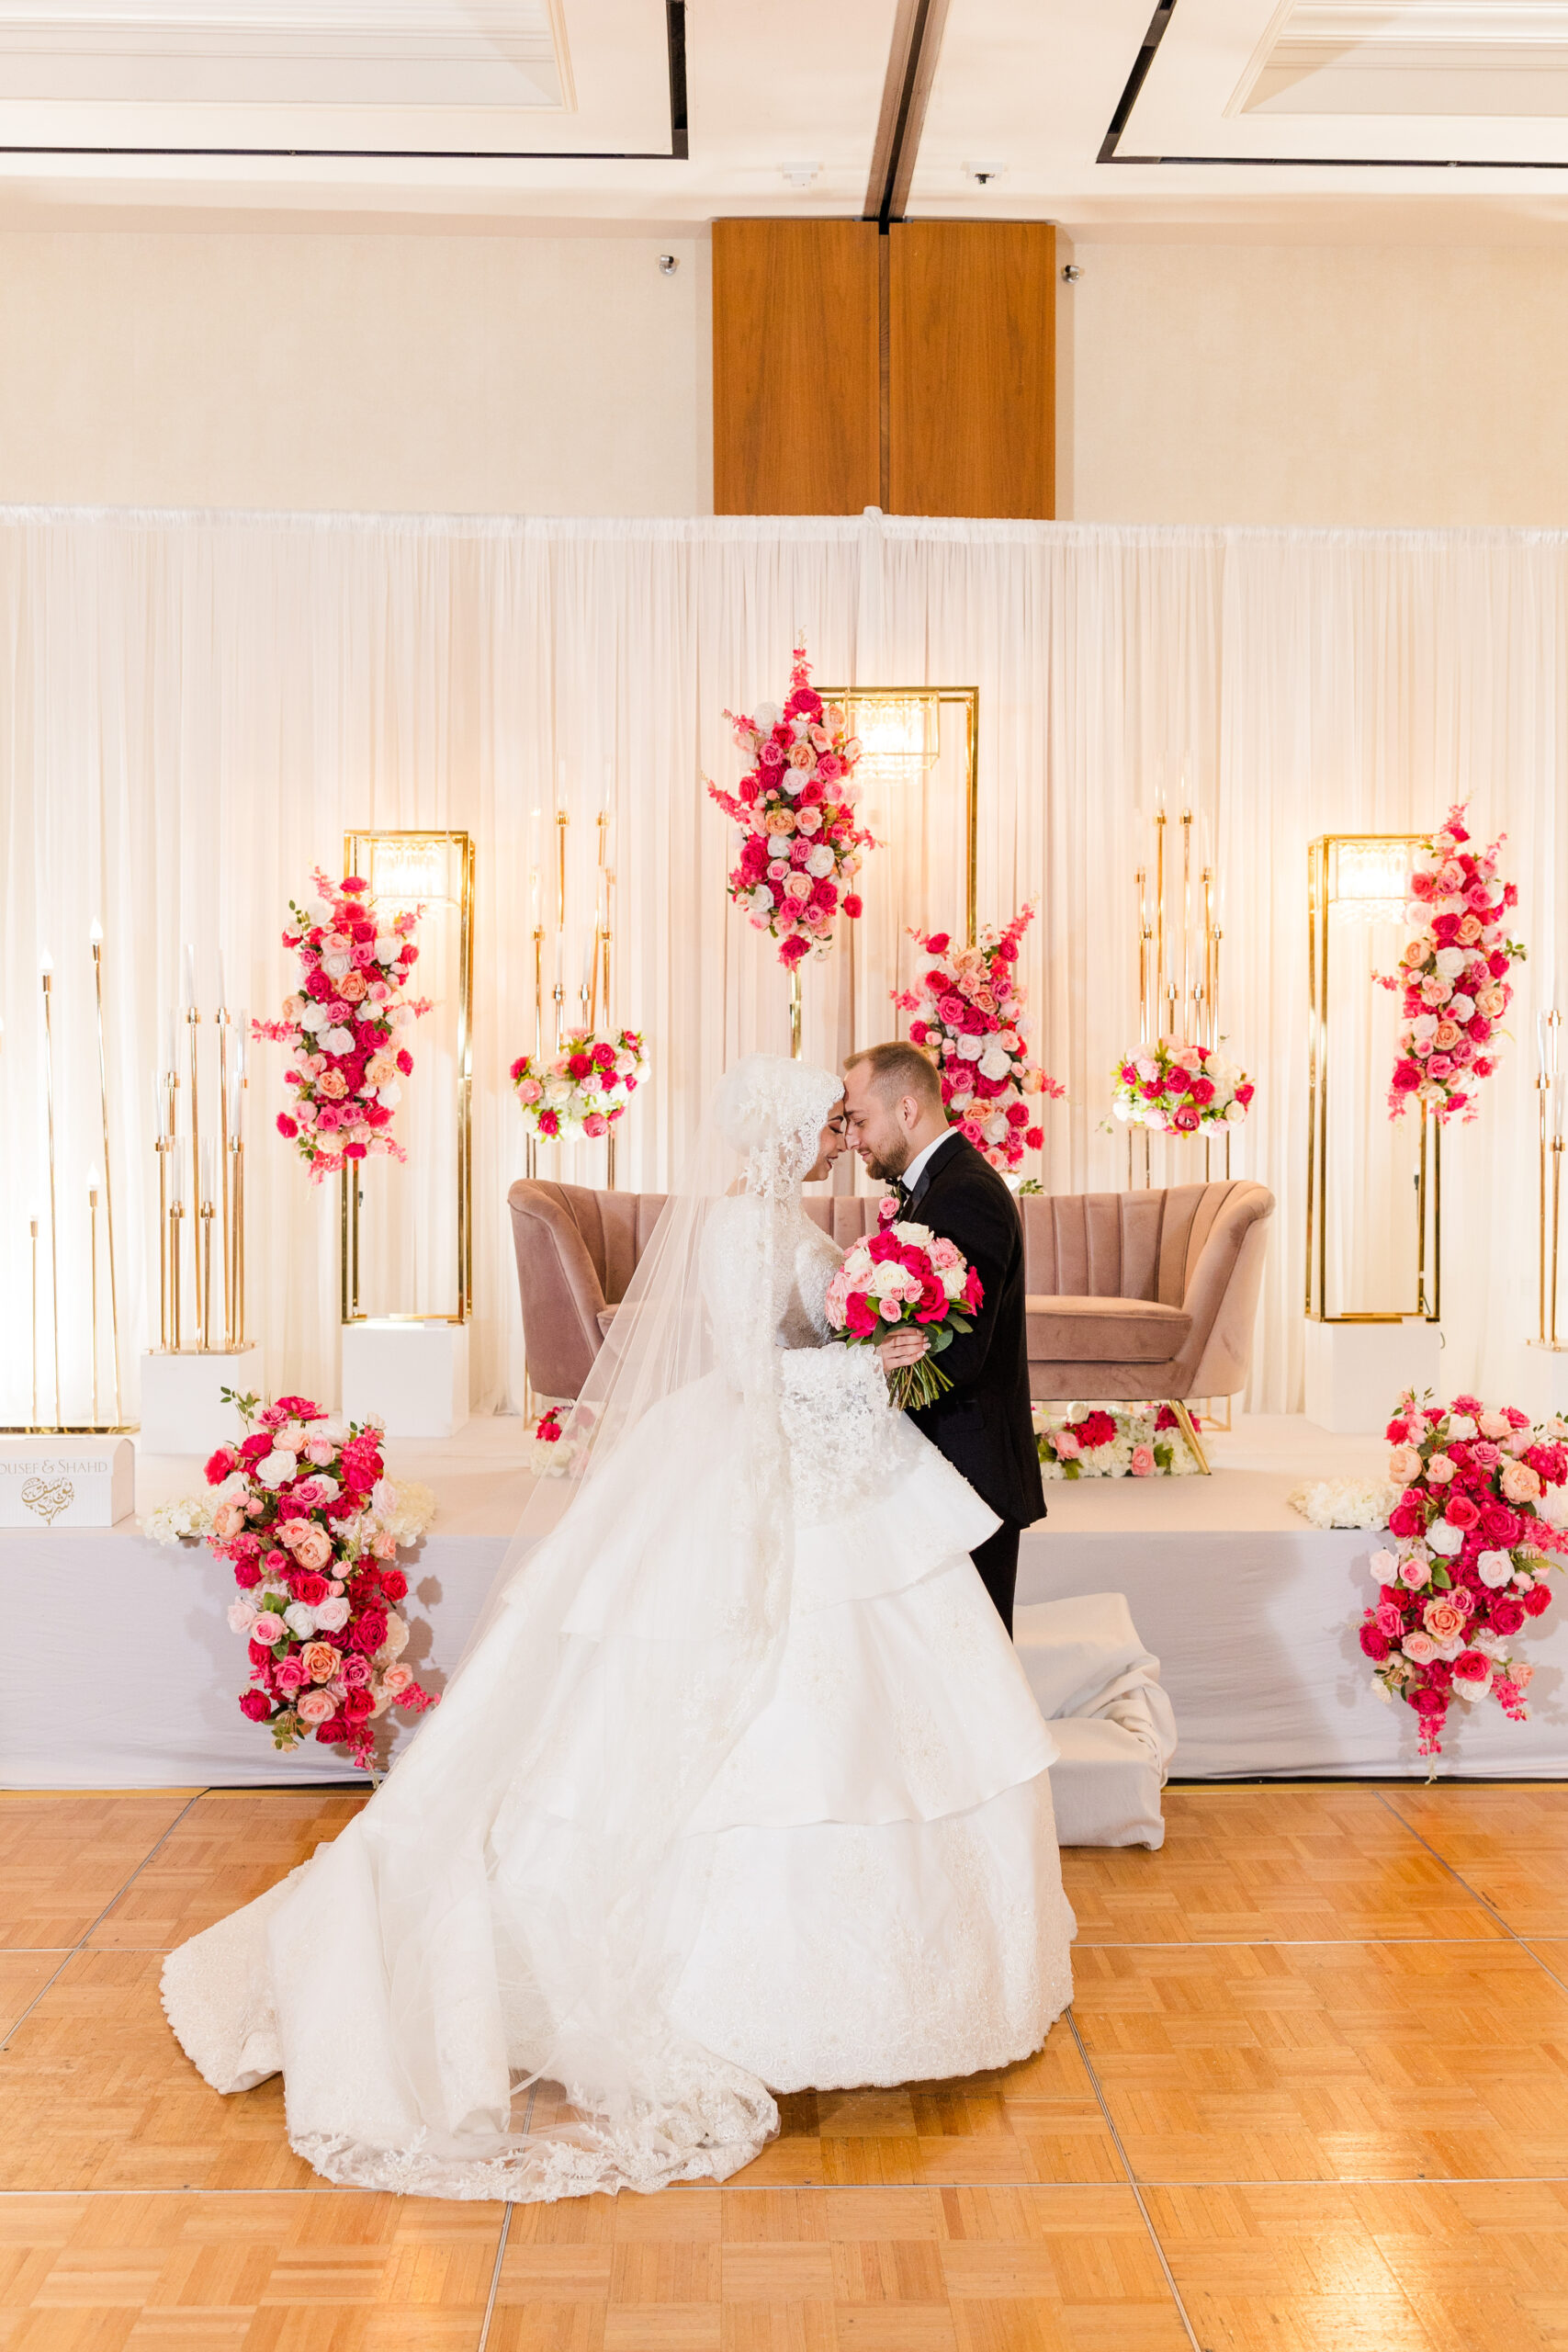 Bride and groom standing in front of wedding decorations at a ballroom reception.